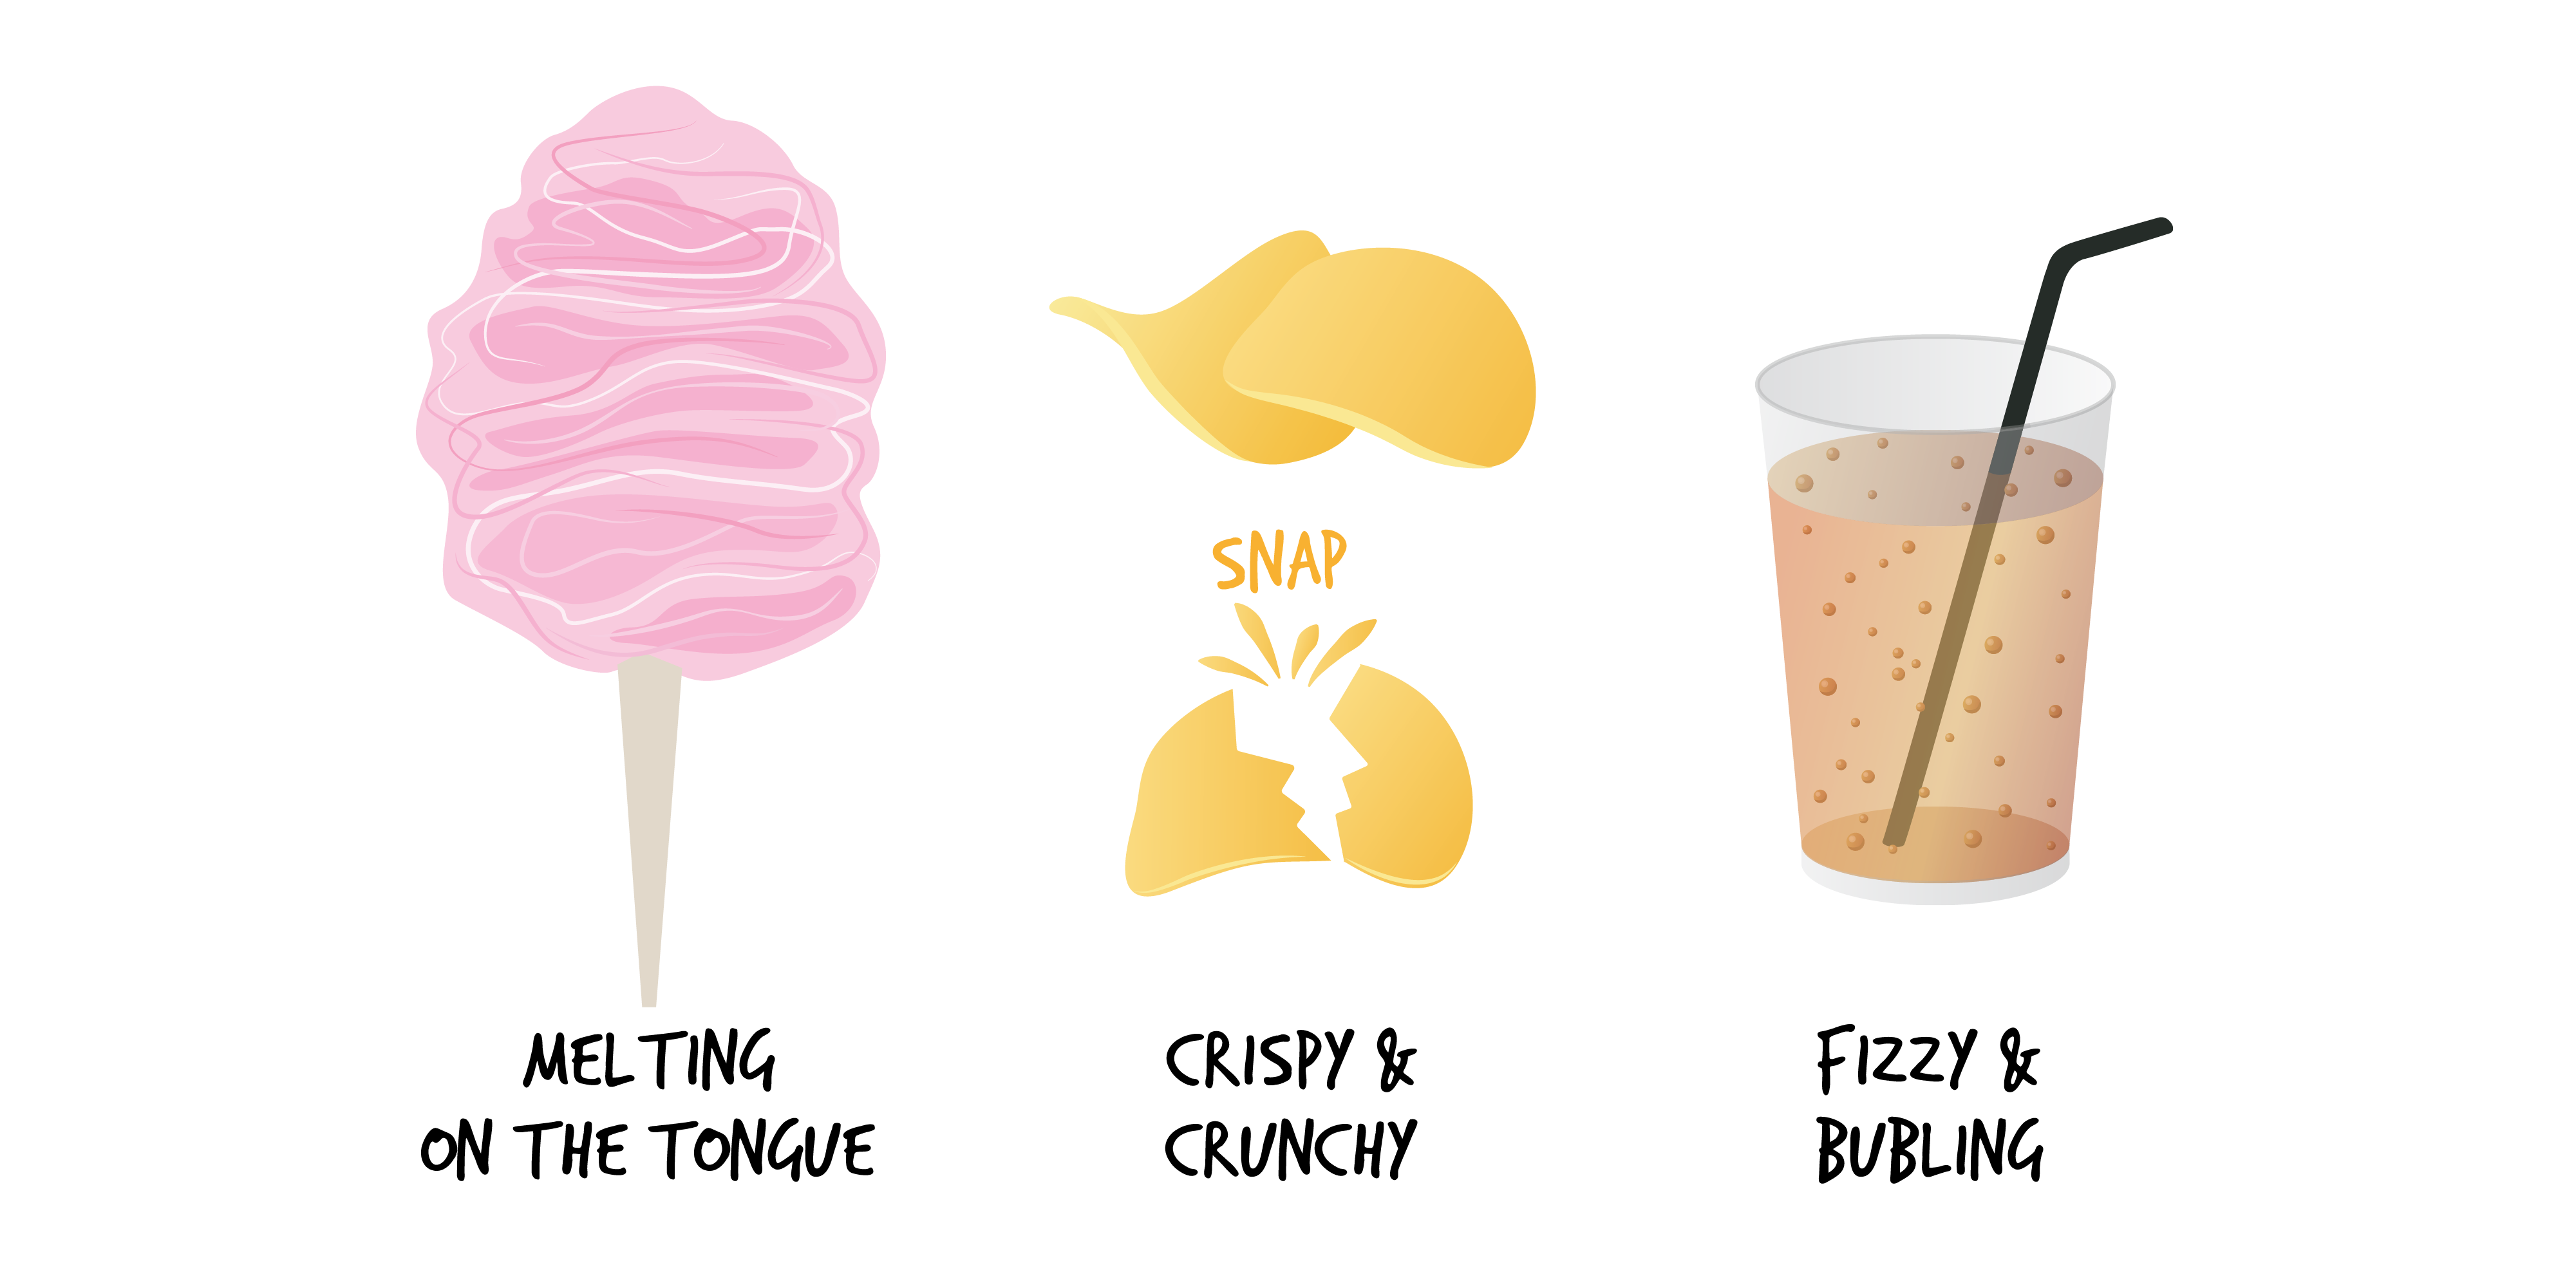 Title Mouthfeels. Pink cotton candy with text Melting on the tongue underneath. Two potato chips, underneath is yellow text Snap, and underneath is a chip breaking in half. Text Crispy and crunchy written underneath. Clear glass with brownish colour fizzy drink, and a black straw. Text Fizzy and bubbling written underneath.